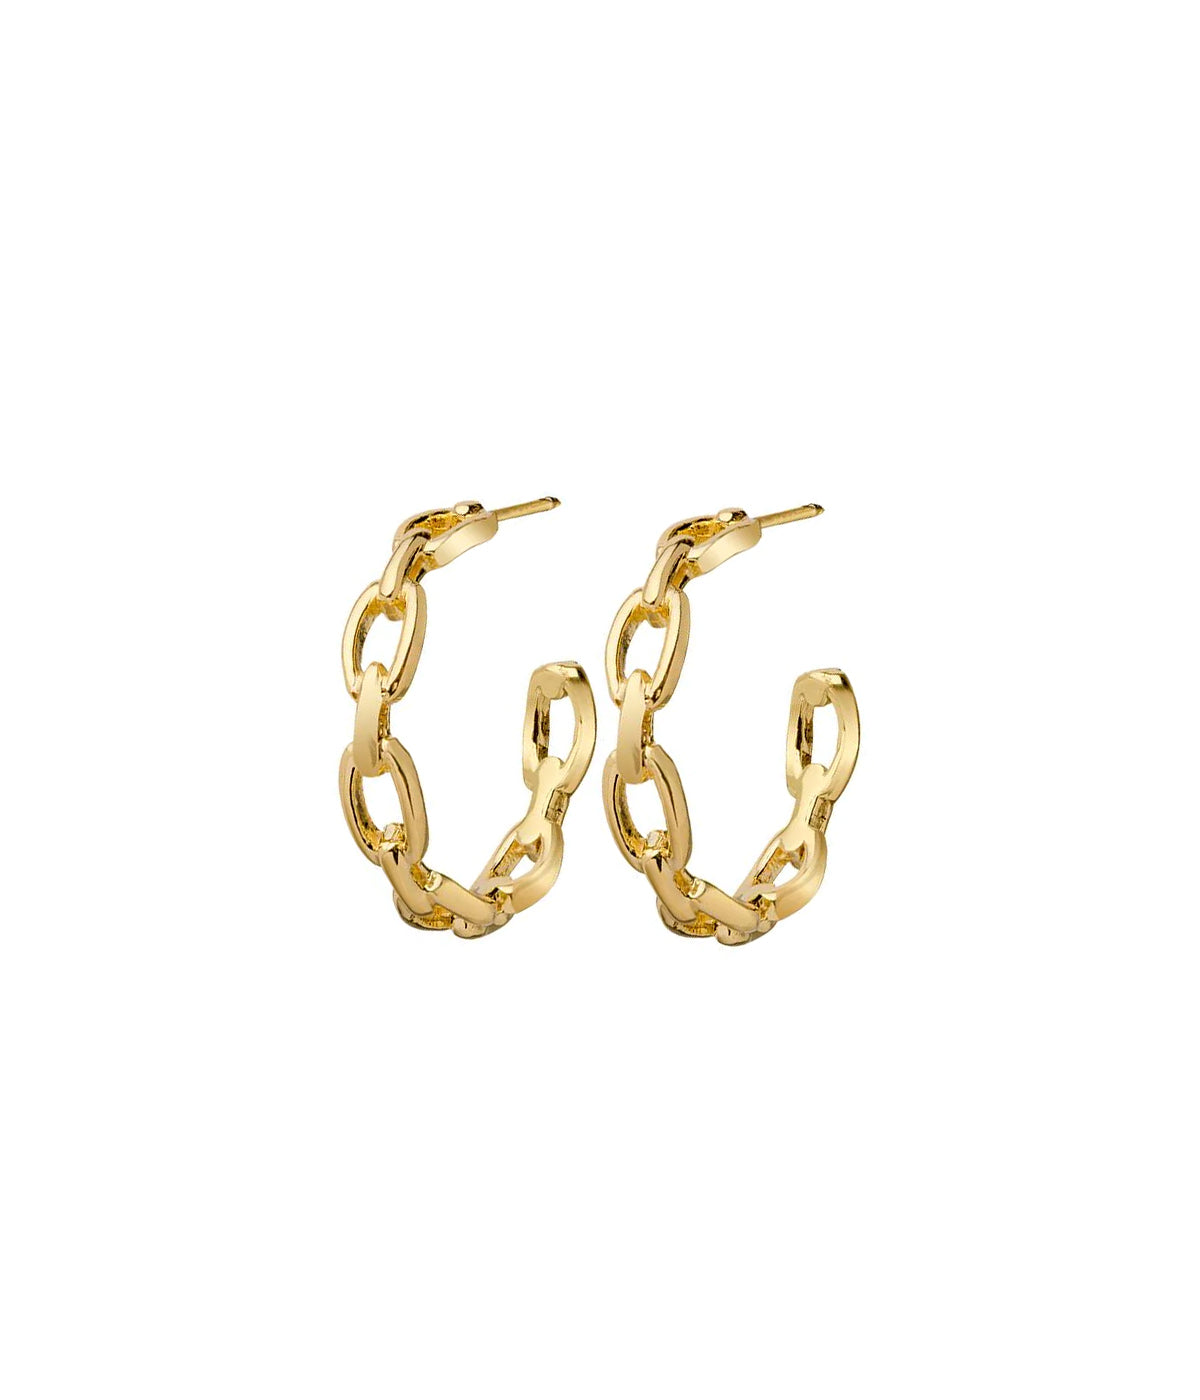 Carmine 1 Hoops in Yellow Gold